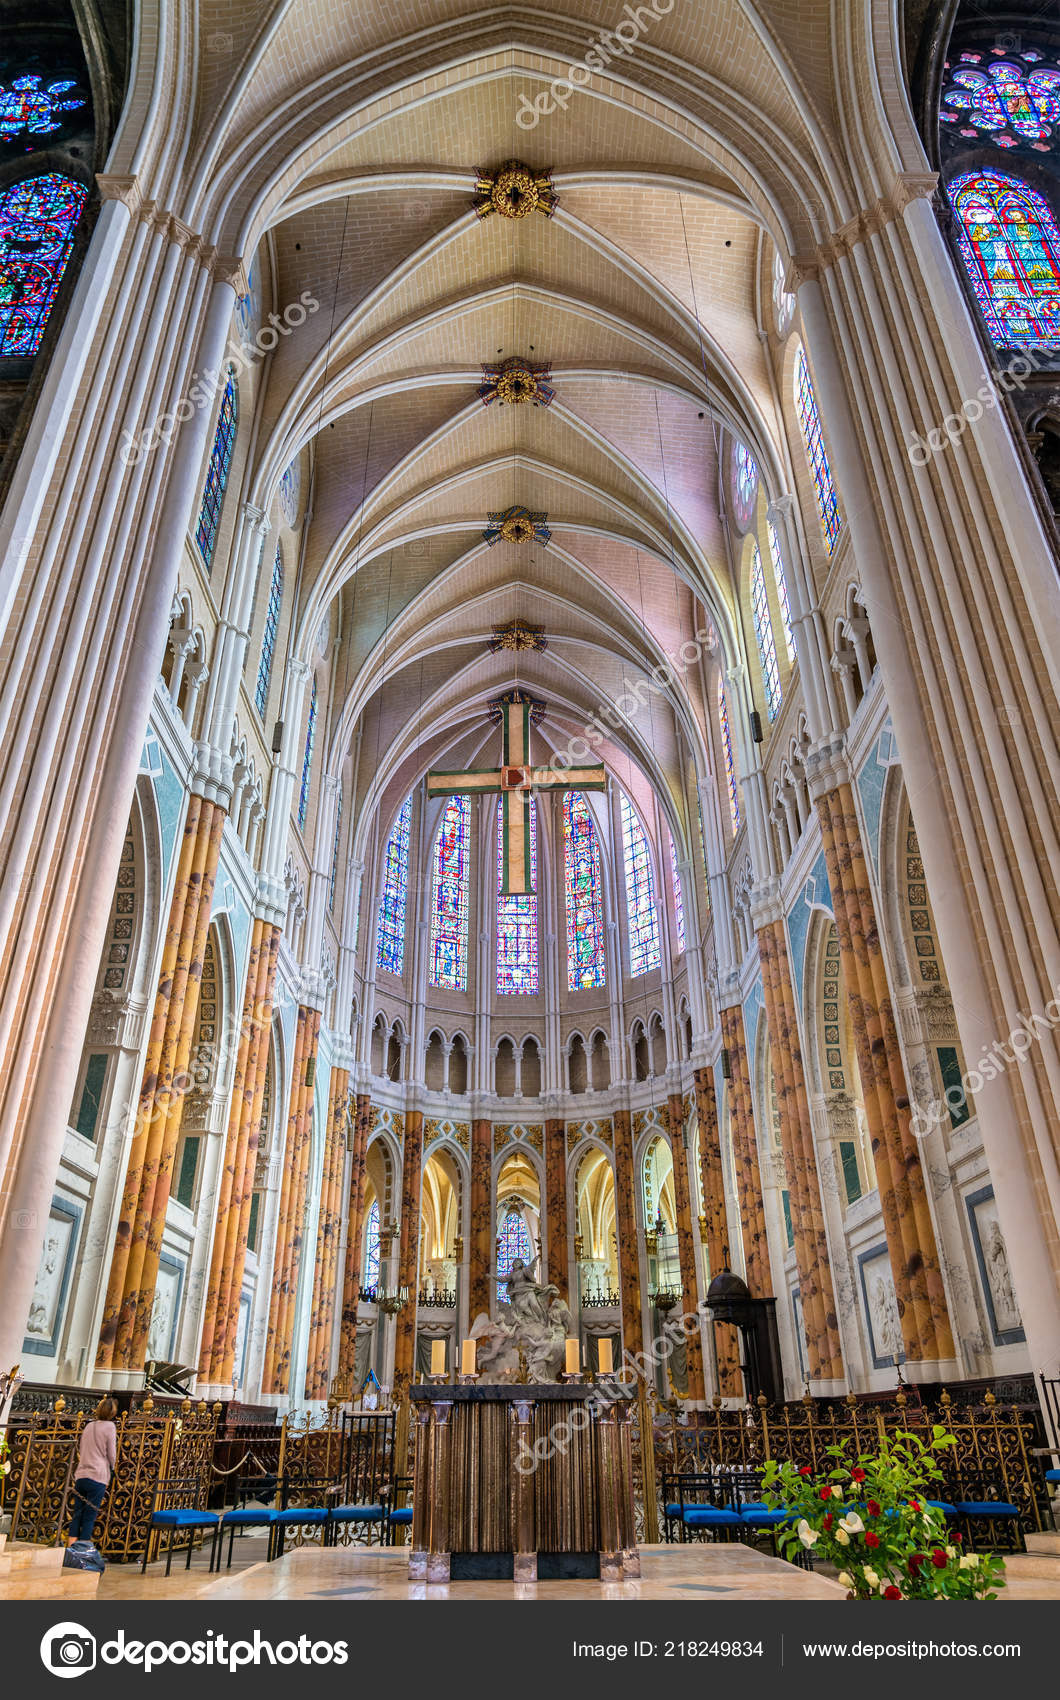 depositphotos_218249834-stock-photo-interior-of-the-cathedral-of.jpg